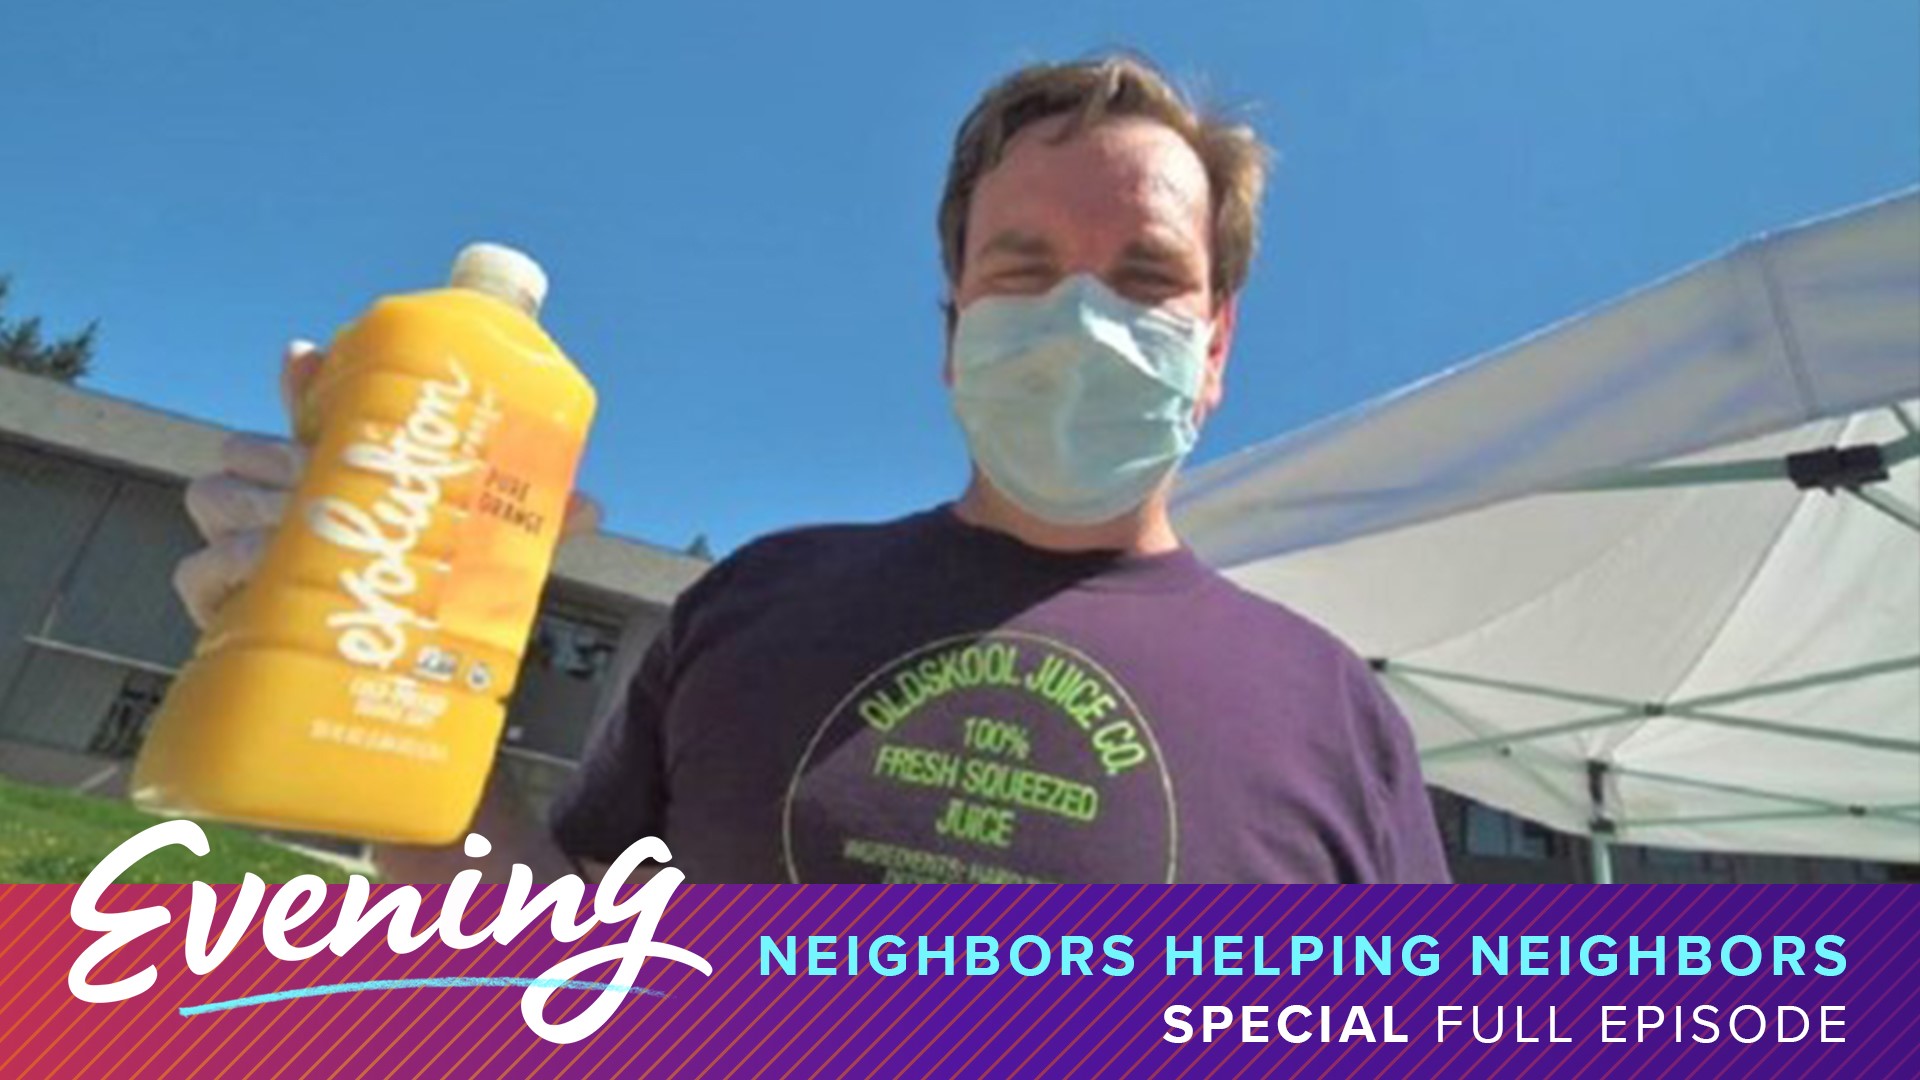 These superheroes are a big help for their community during the pandemic.